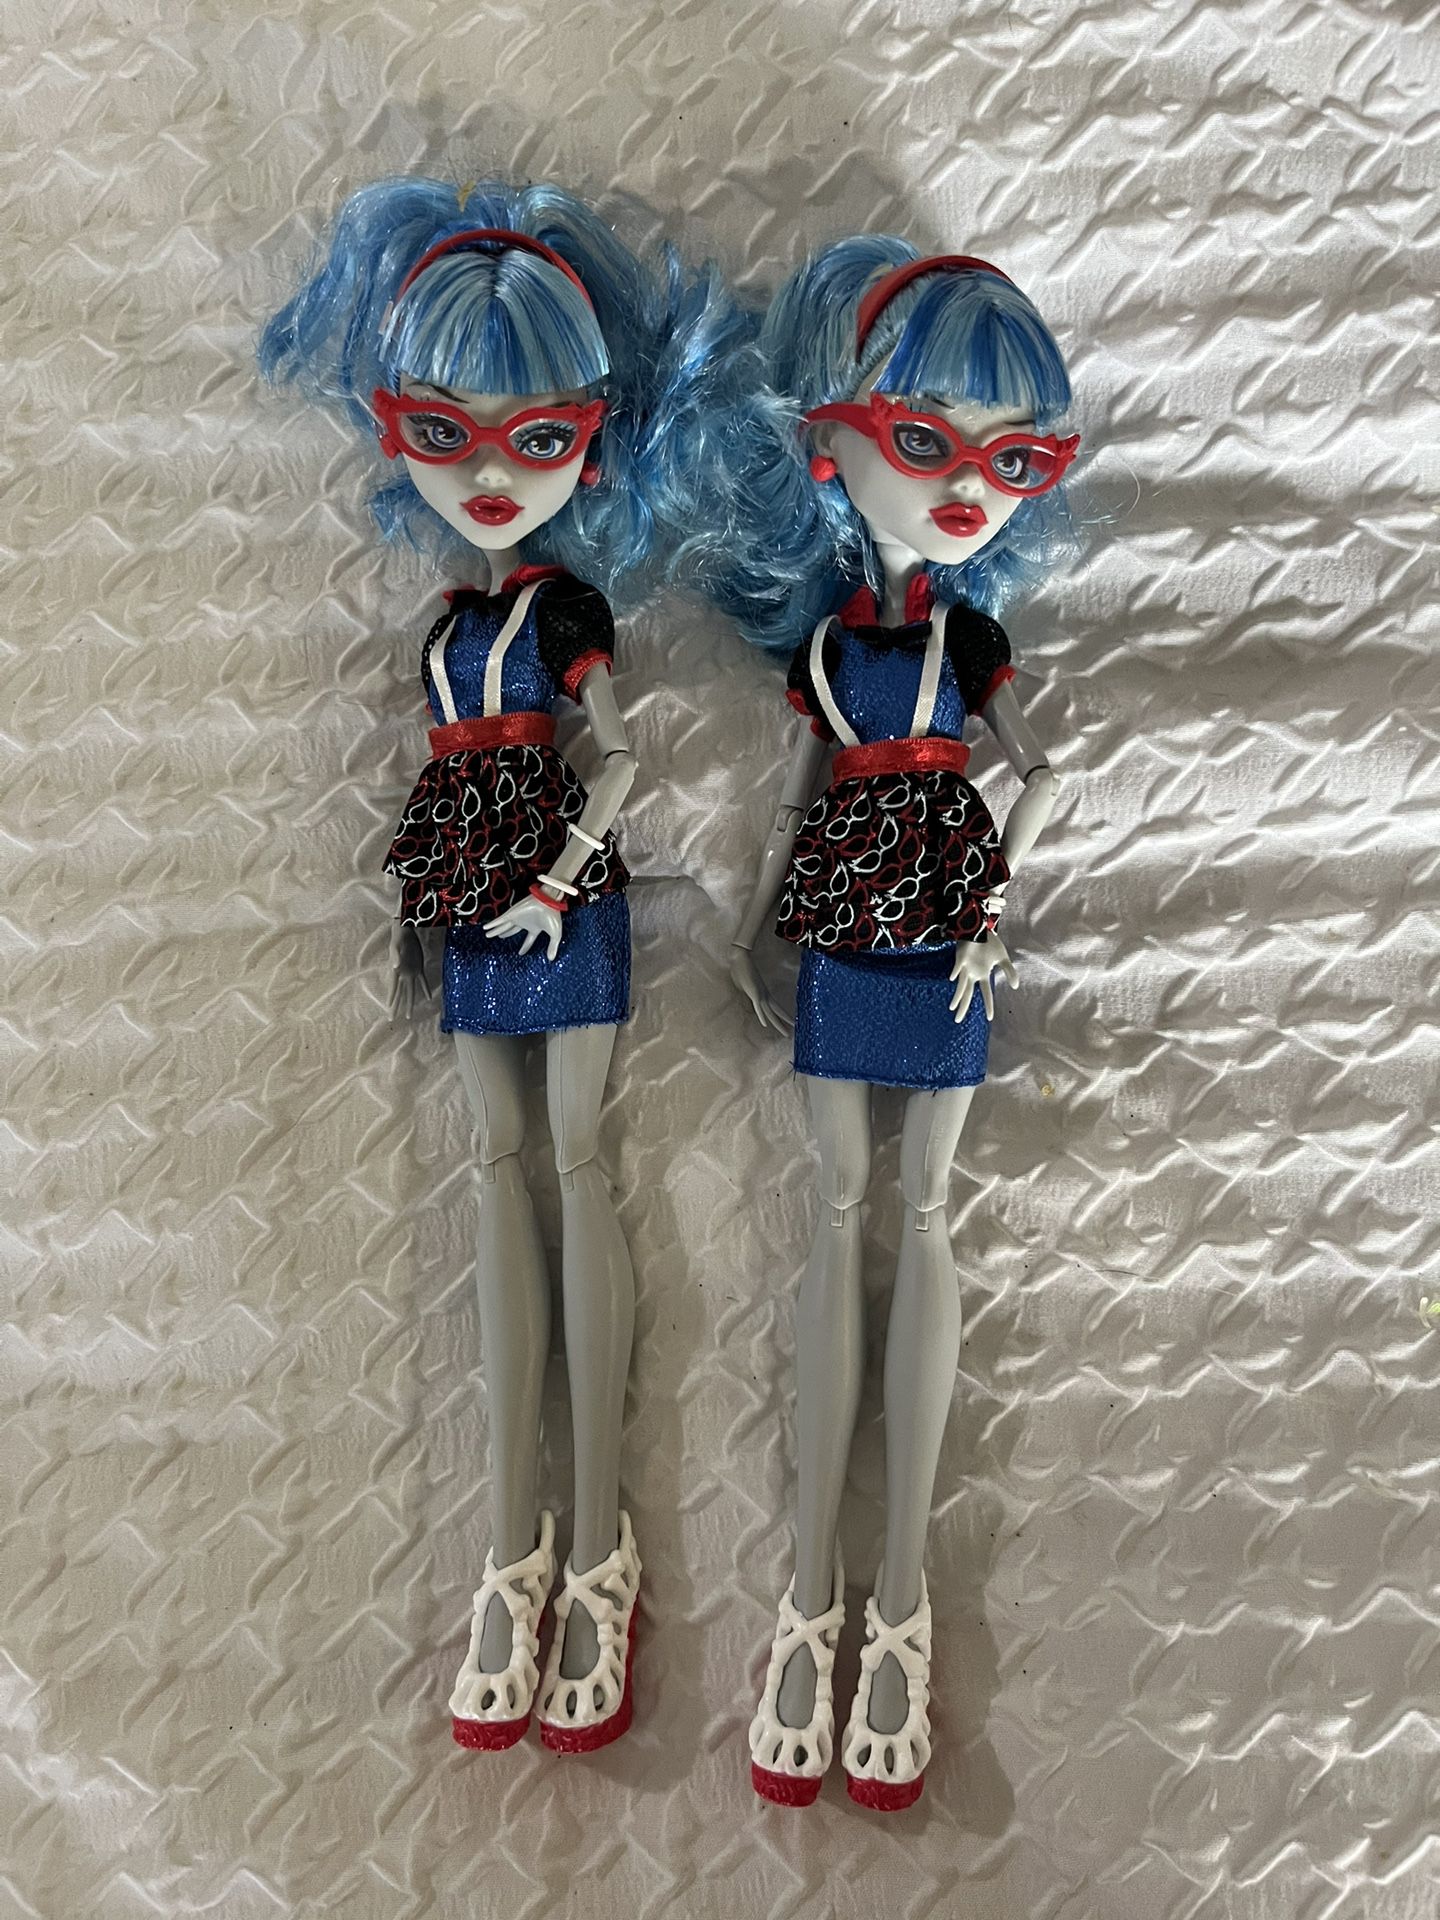 Monster High Ghoulia Yelps Doll: Girls Night Out 2012